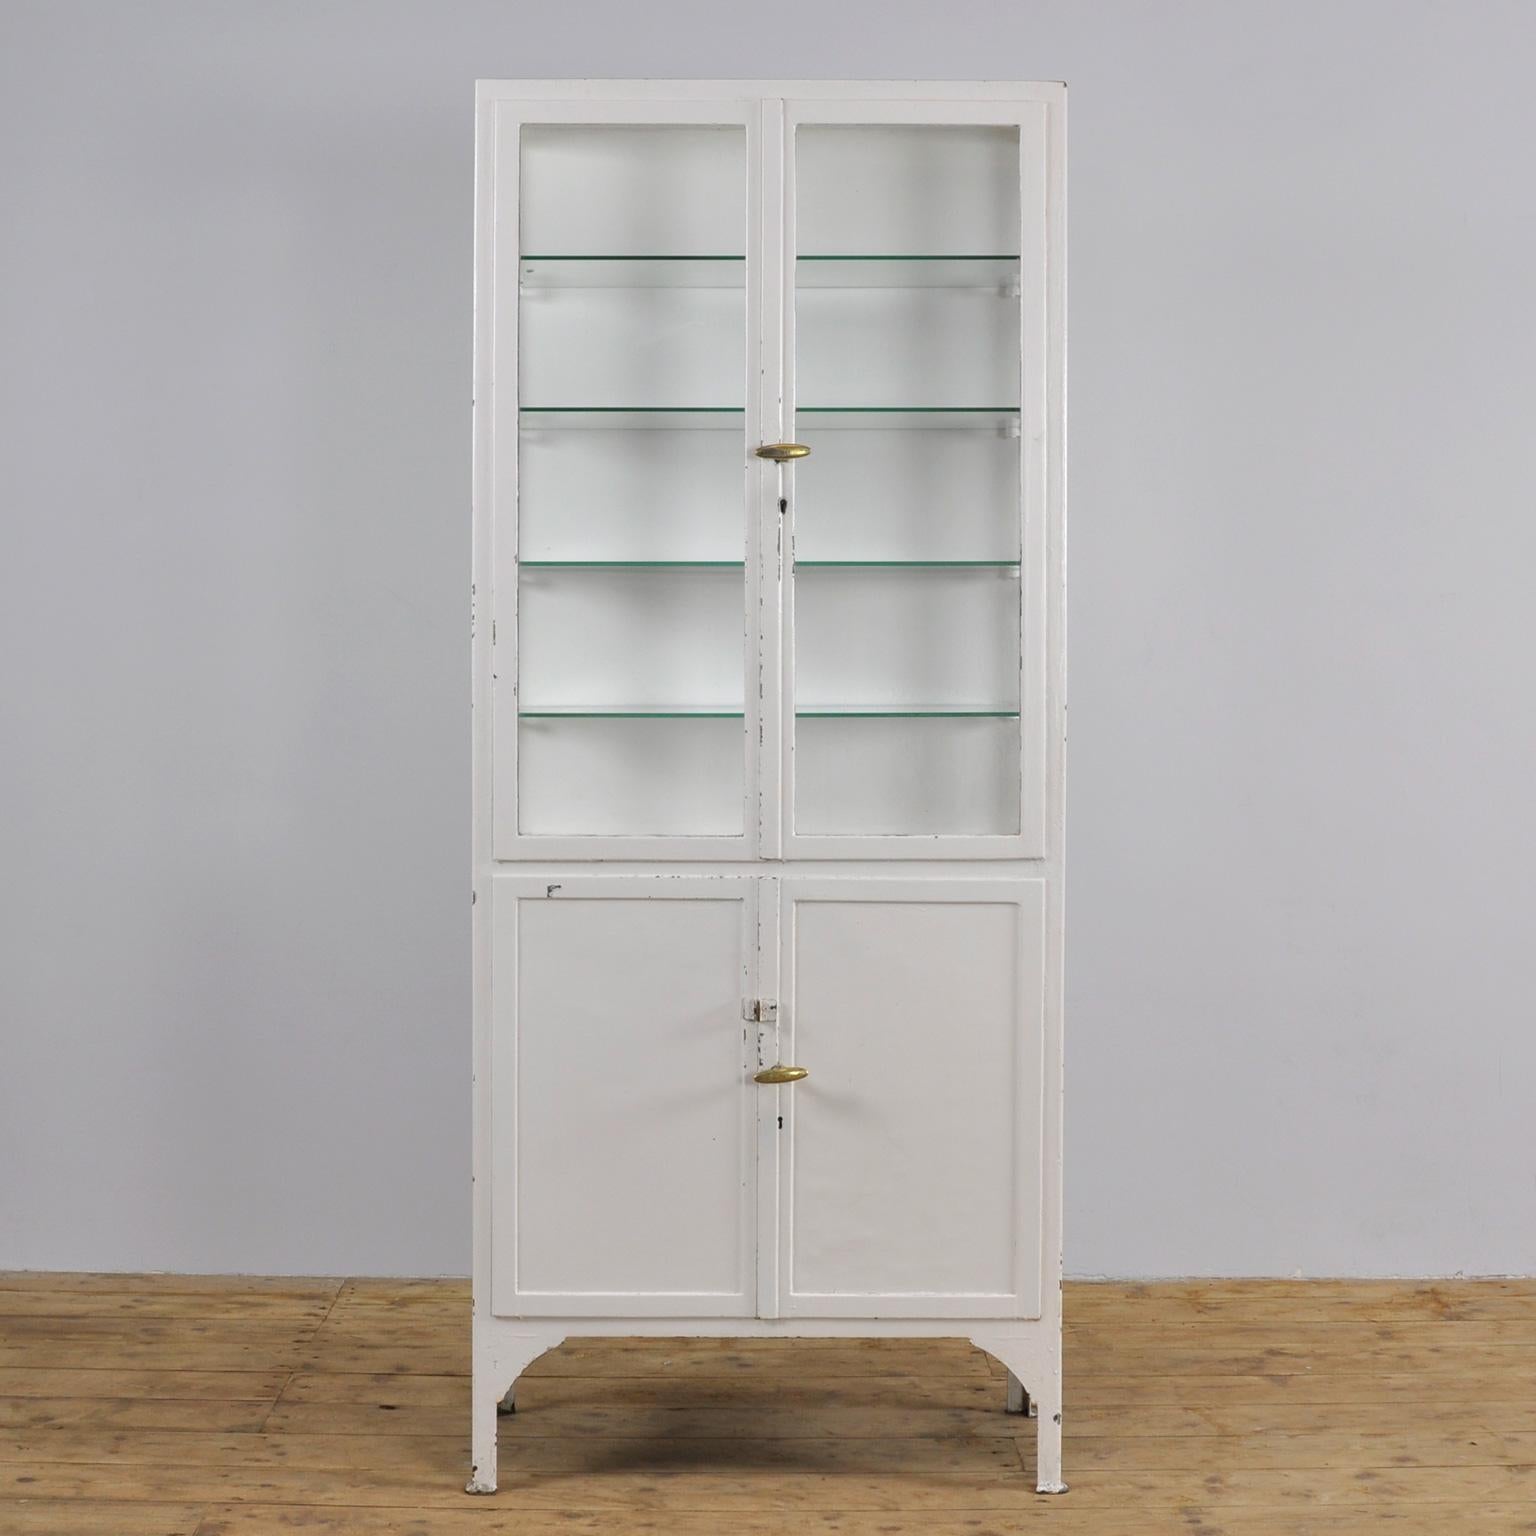 This former medicine cabinet was produced in the 1930s in Hungary. It is made of thick iron and glass. In the upper part, there are four-glass shelves.